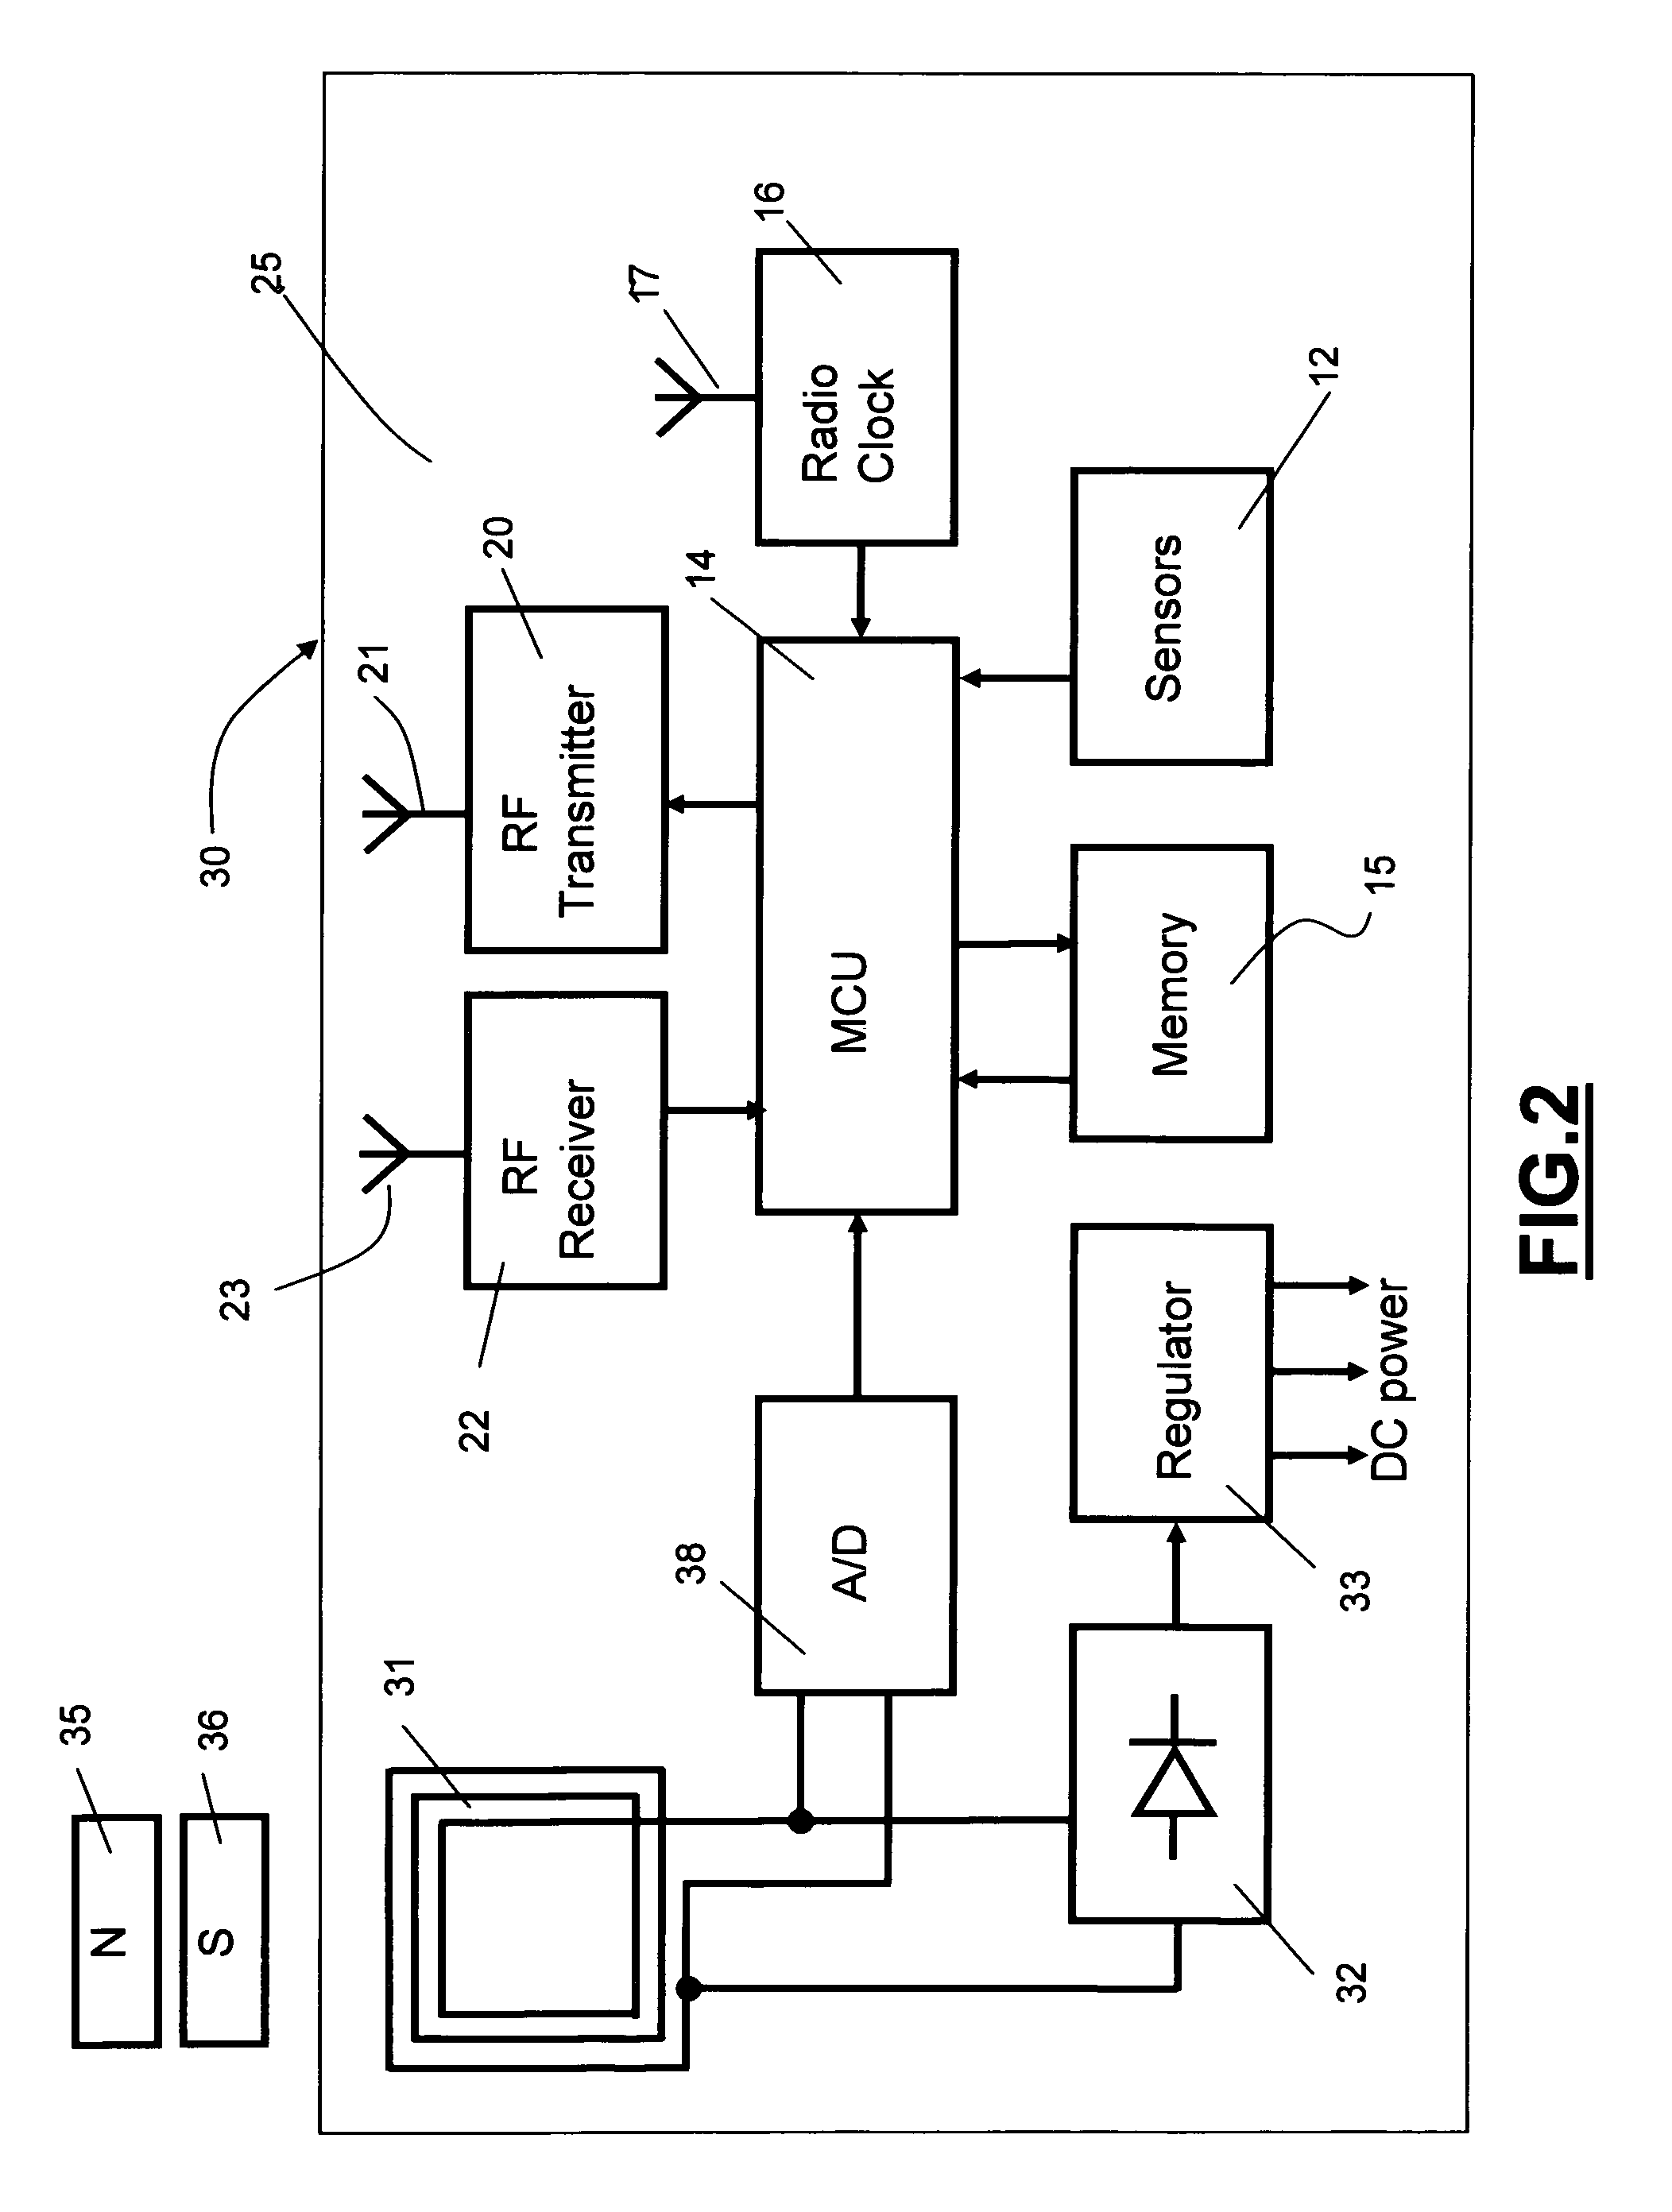 Tire parameter sensor unit with real time data storage